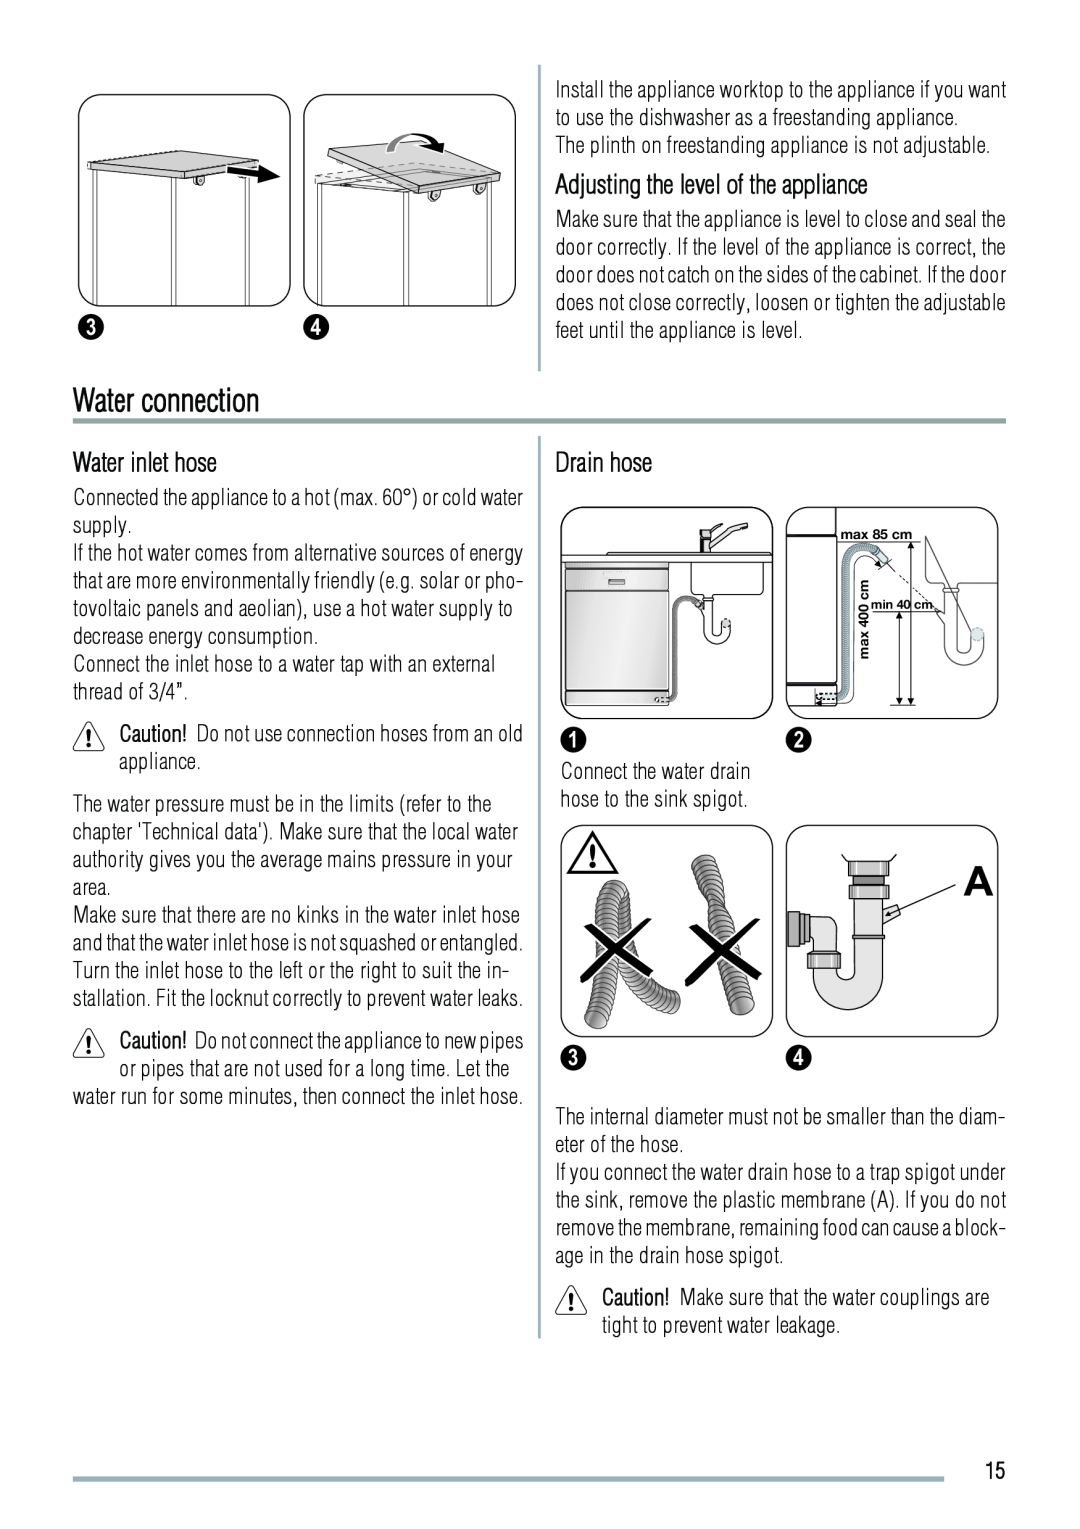 Zanussi ZDS 2010 user manual Water connection, Adjusting the level of the appliance, Water inlet hose, Drain hose 